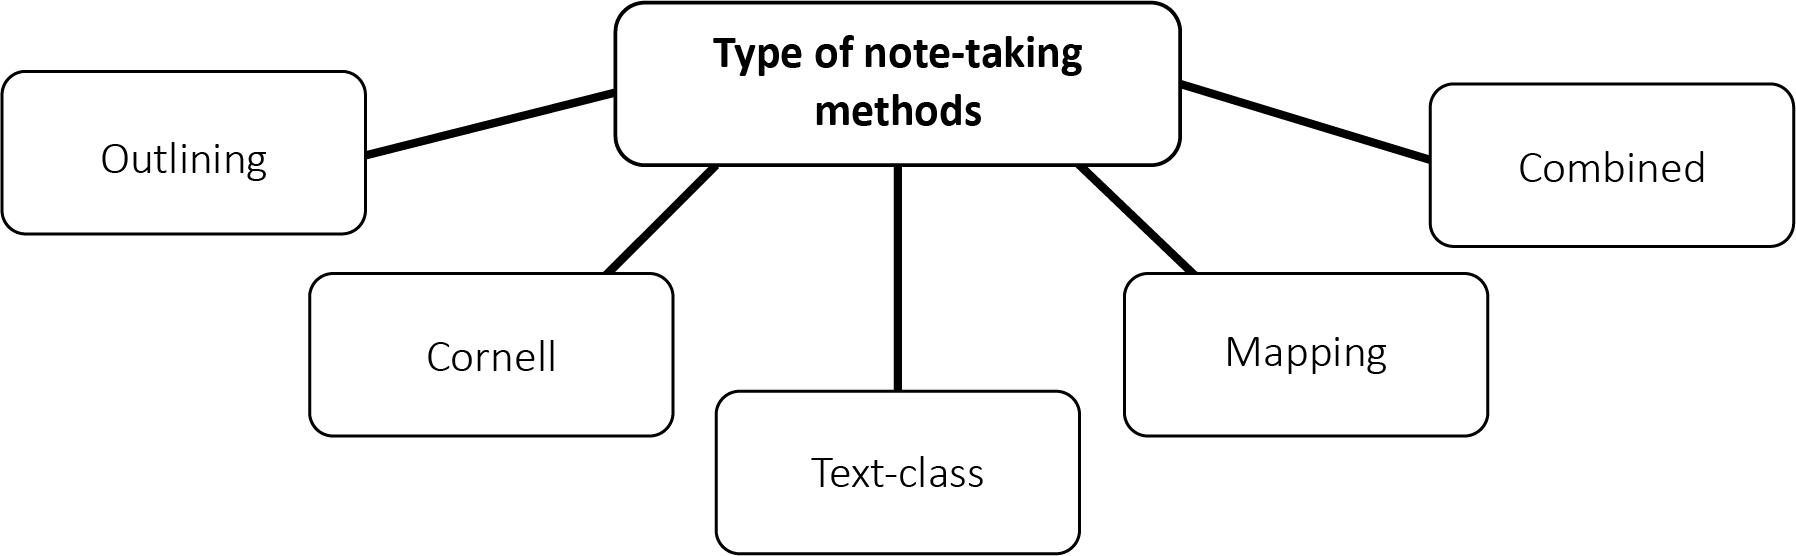 Visual representation of Note-taking methods : (1) Outlining, (2) Cornell, (3) Text-Class, (4) Mapping and (5) Combined